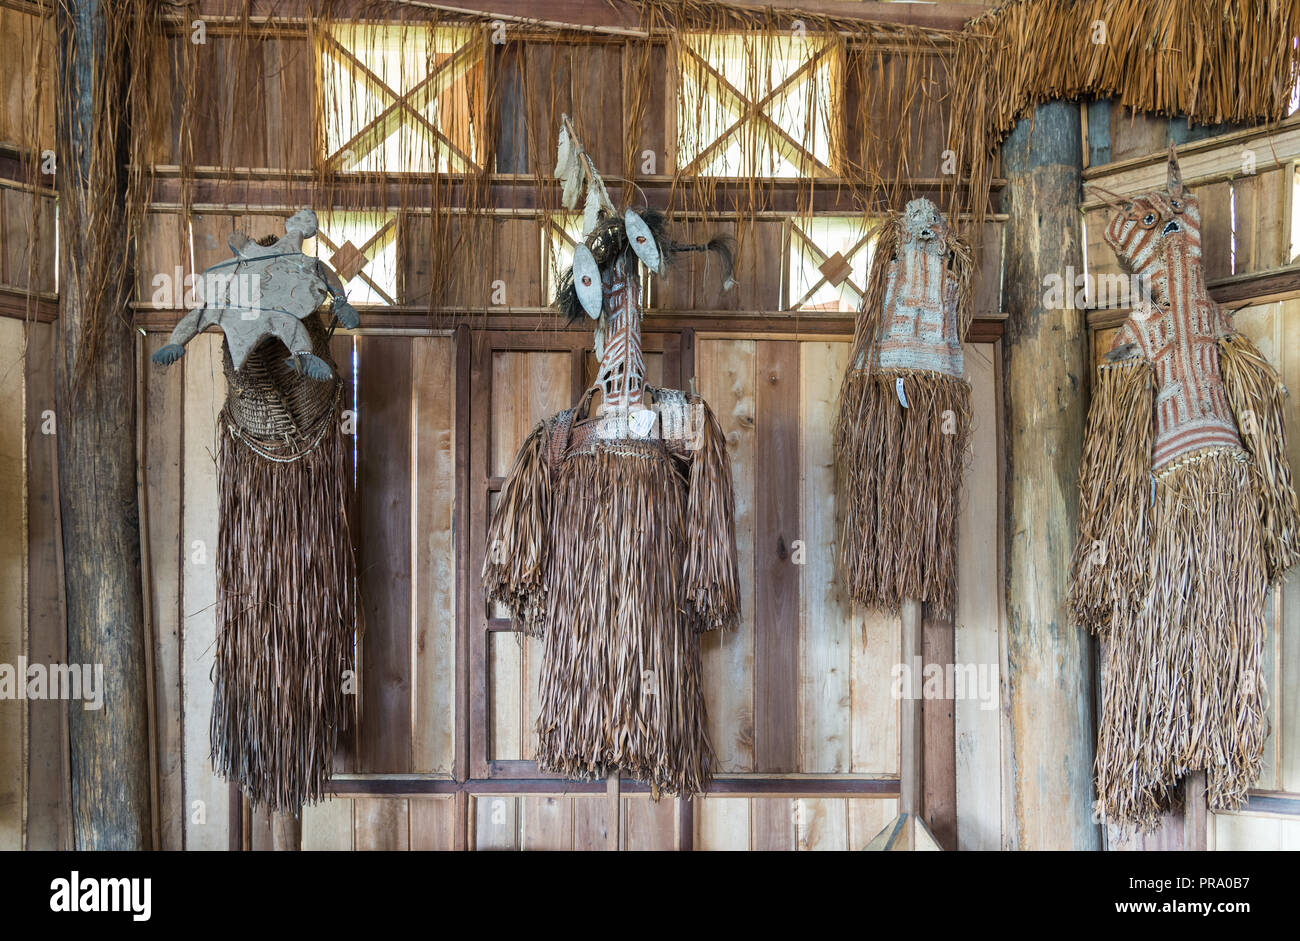 Collection of traditional grass skirts indigenous women wear hanging on a wall. Wamena, Papua, Indonesia. Stock Photo